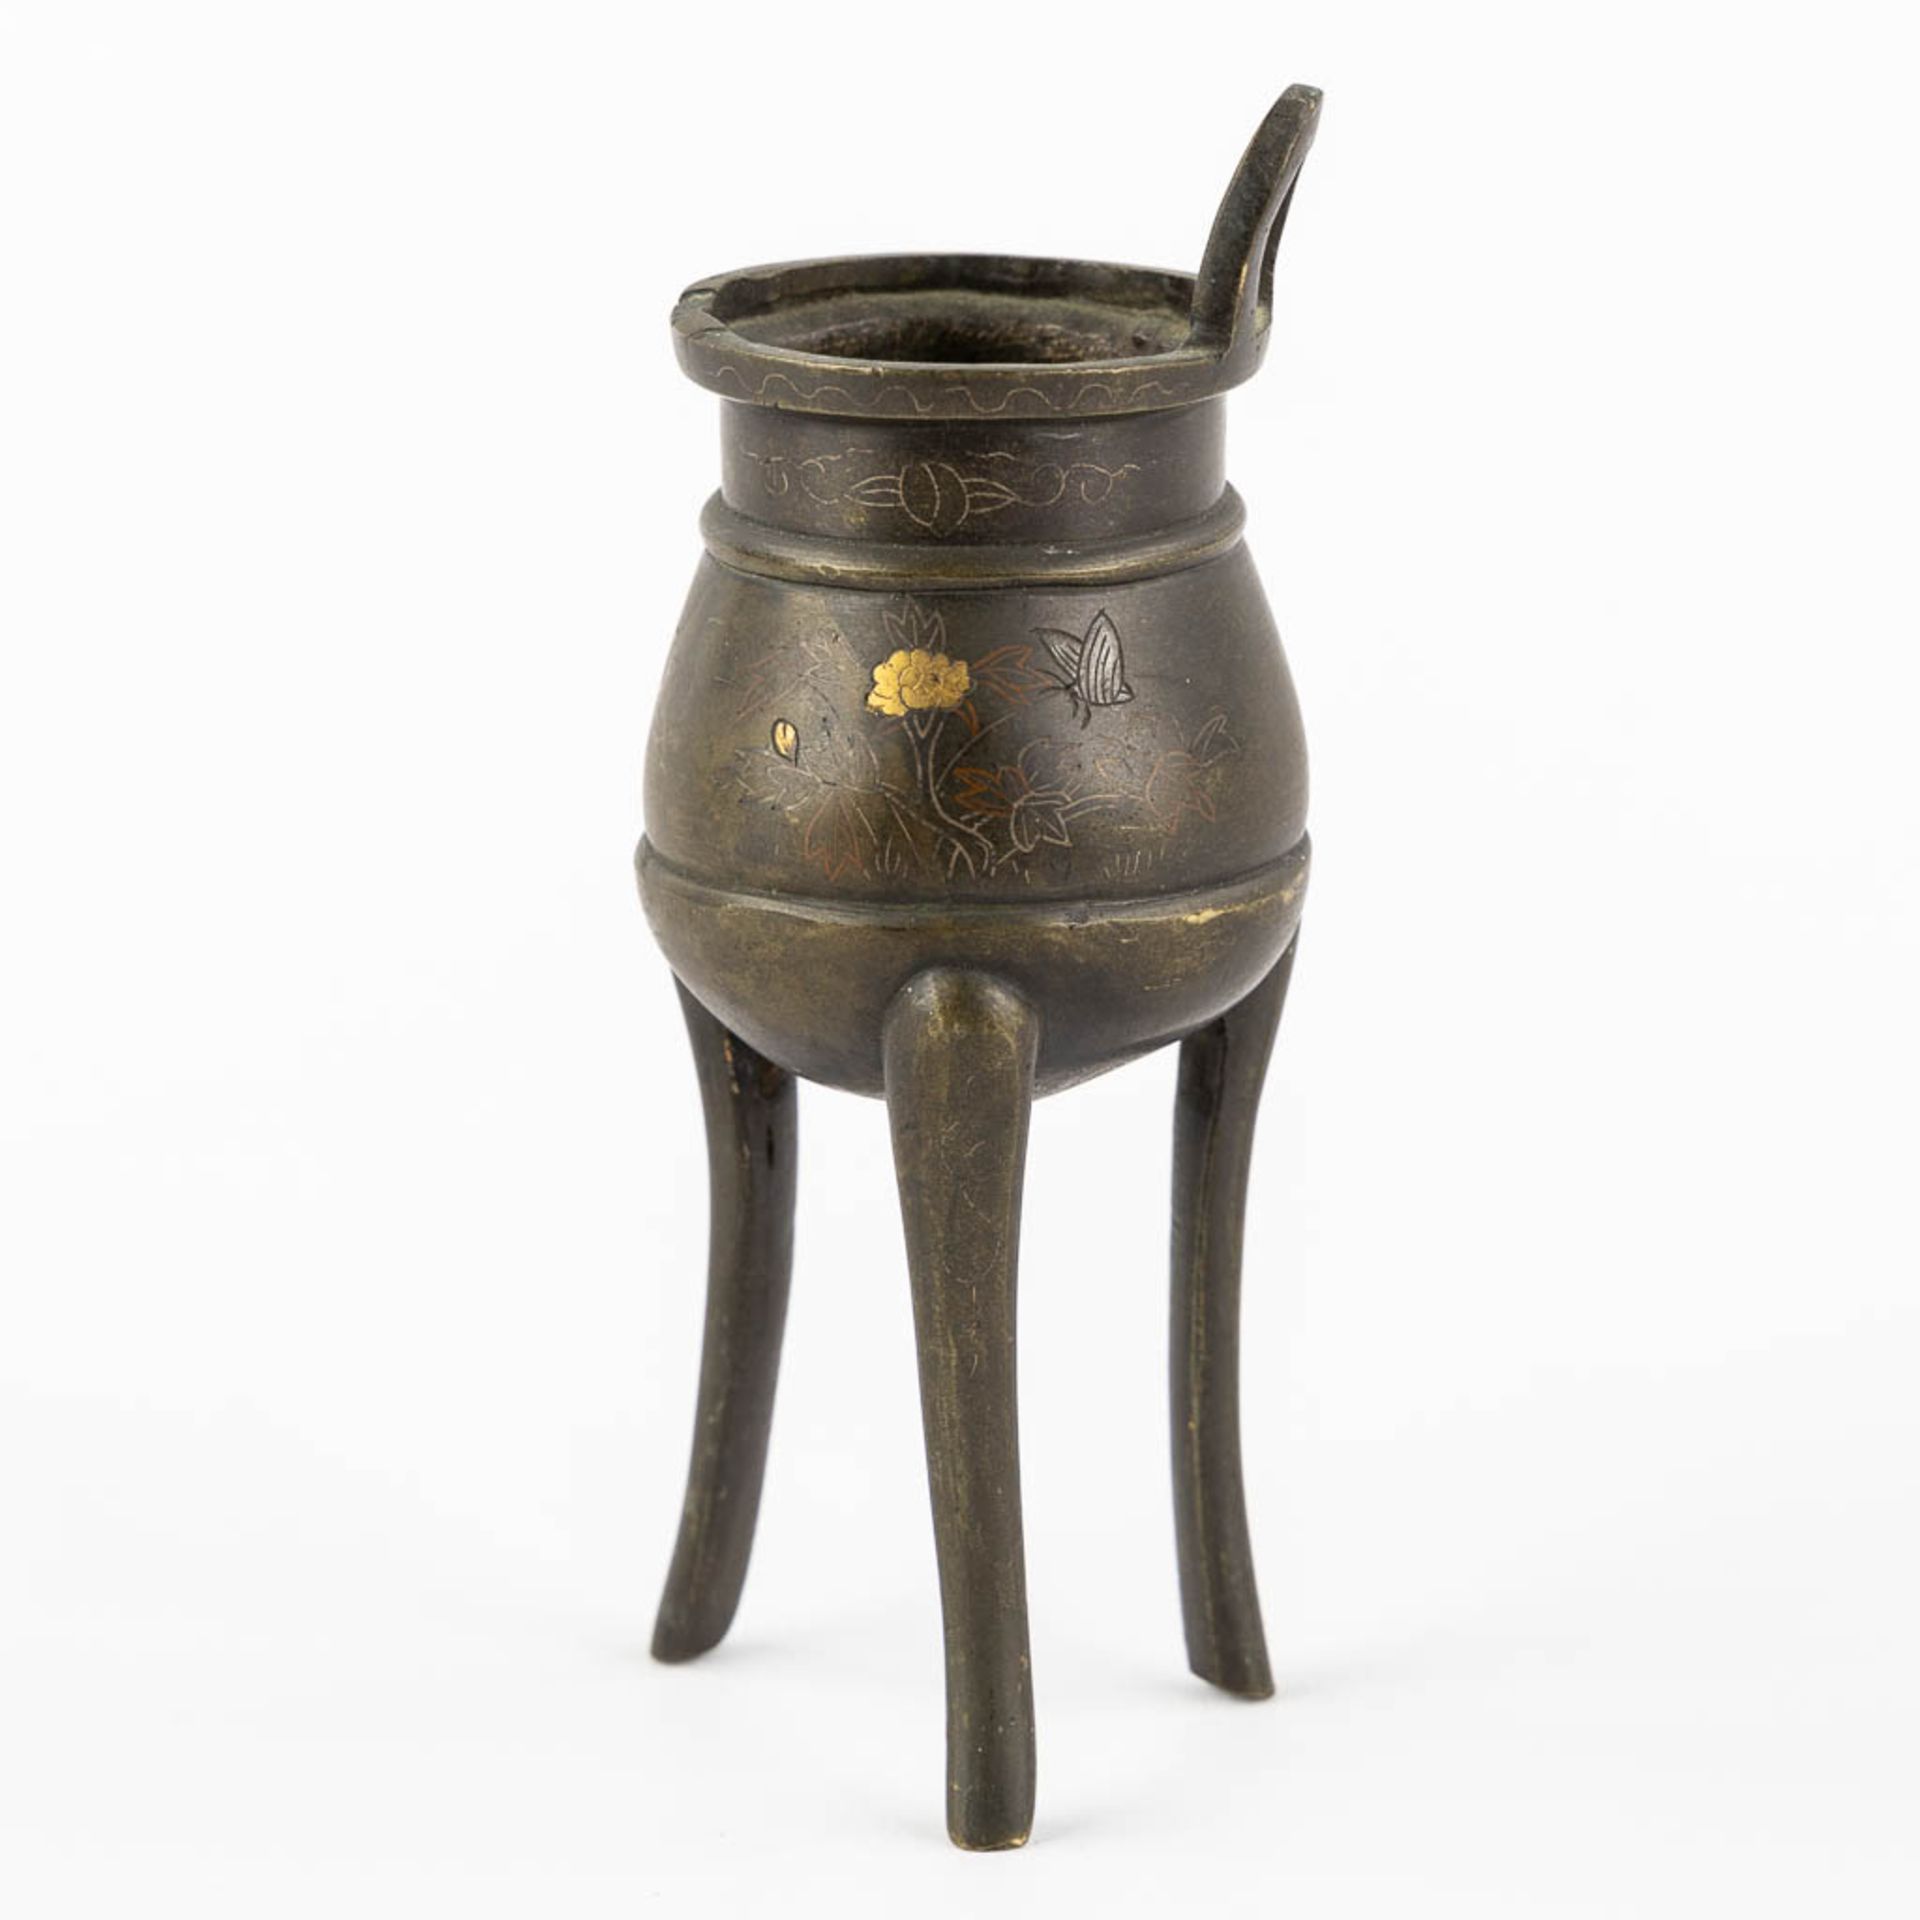 A Chinese insence burner, vase and a lucky coin. Bronze. (H:19 x D:5 cm) - Bild 10 aus 19